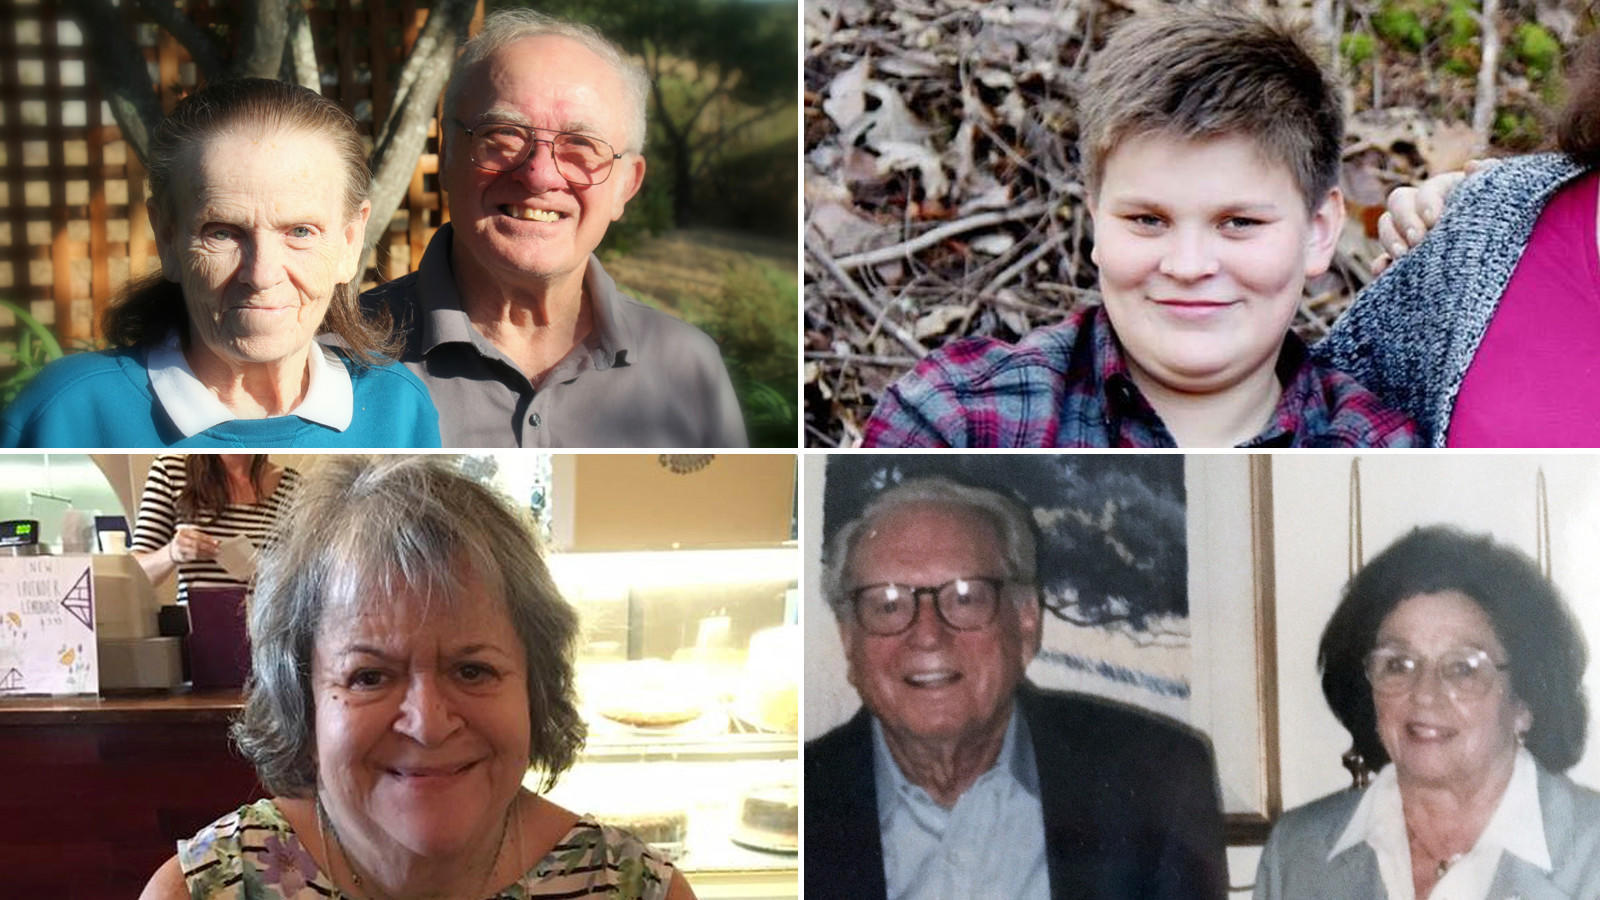 These are some of the victims of the Northern California firestorm